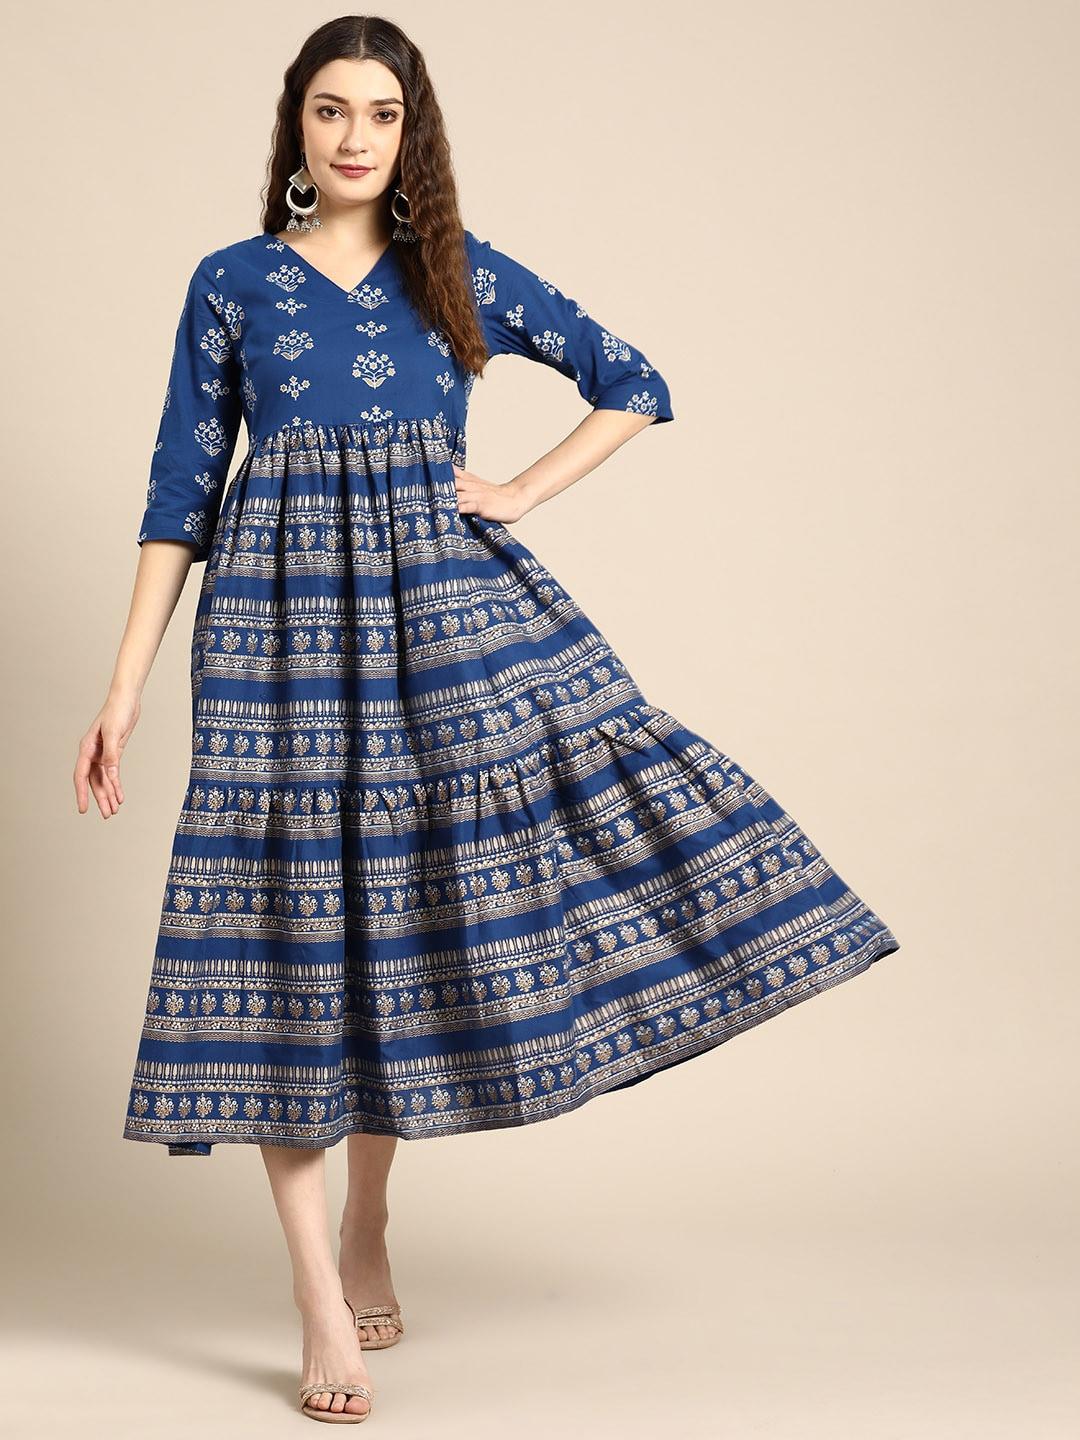 sangria-blue-&-gold-toned-pure-cotton-ethnic-motifs-a-line-tiered-midi-dress